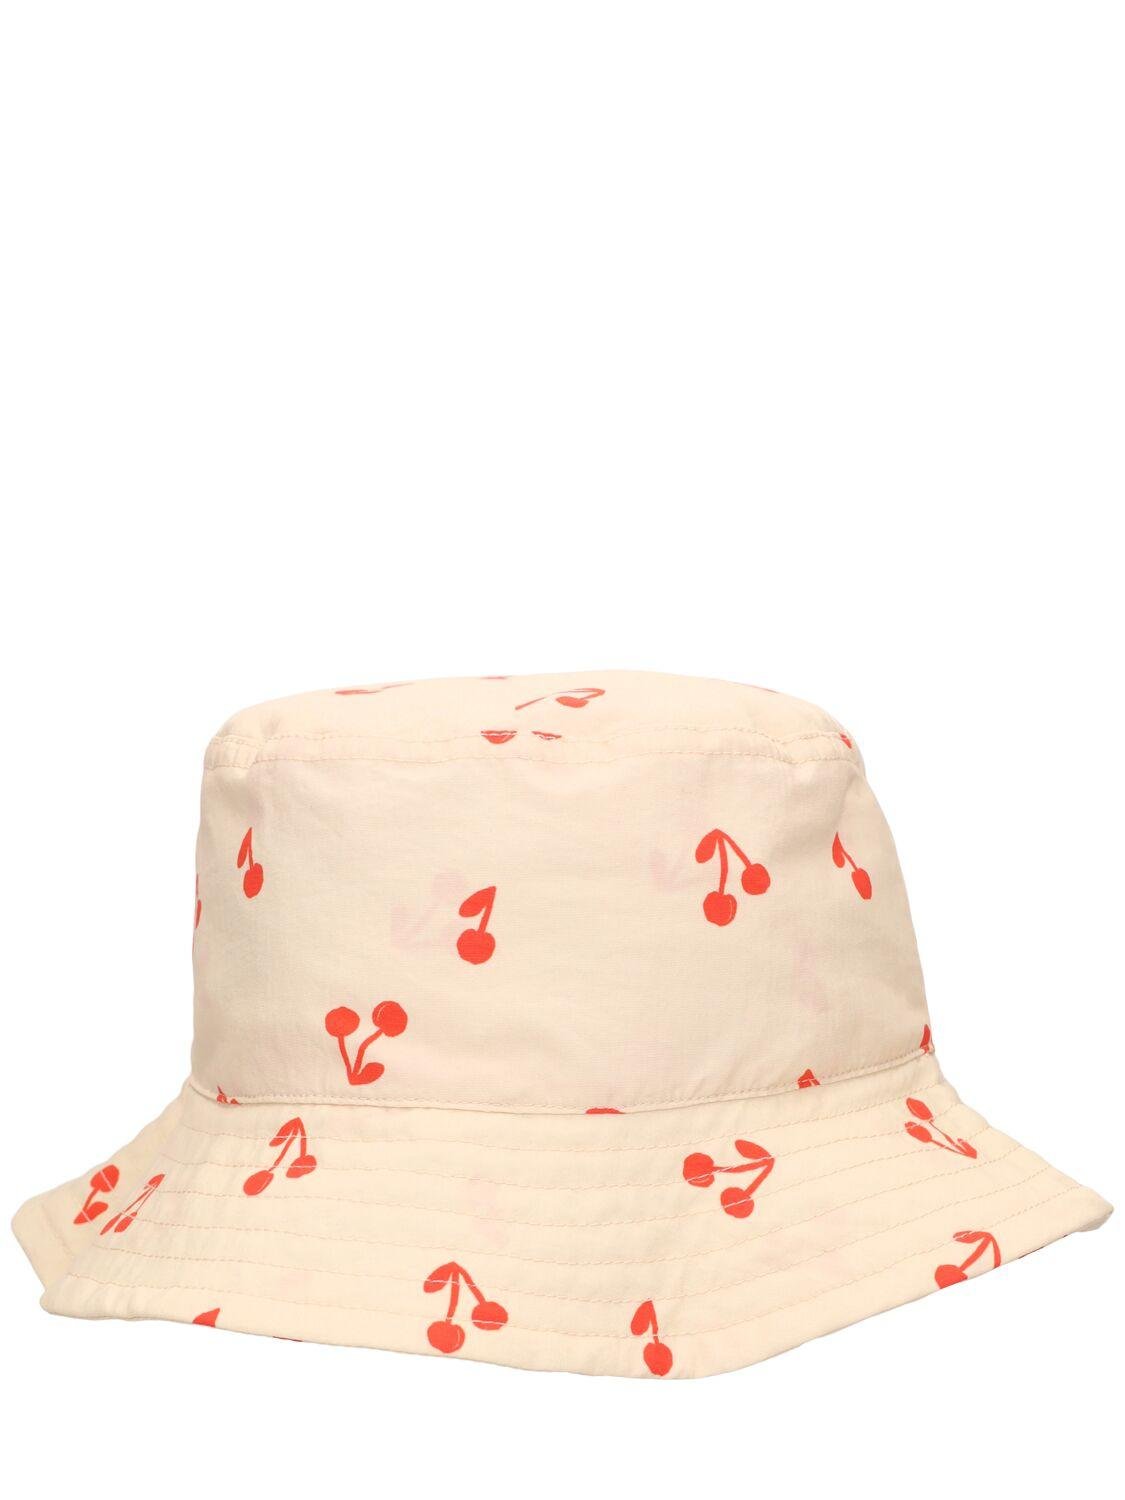 Cherry Print Recycled Nylon Bucket Hat by LIEWOOD